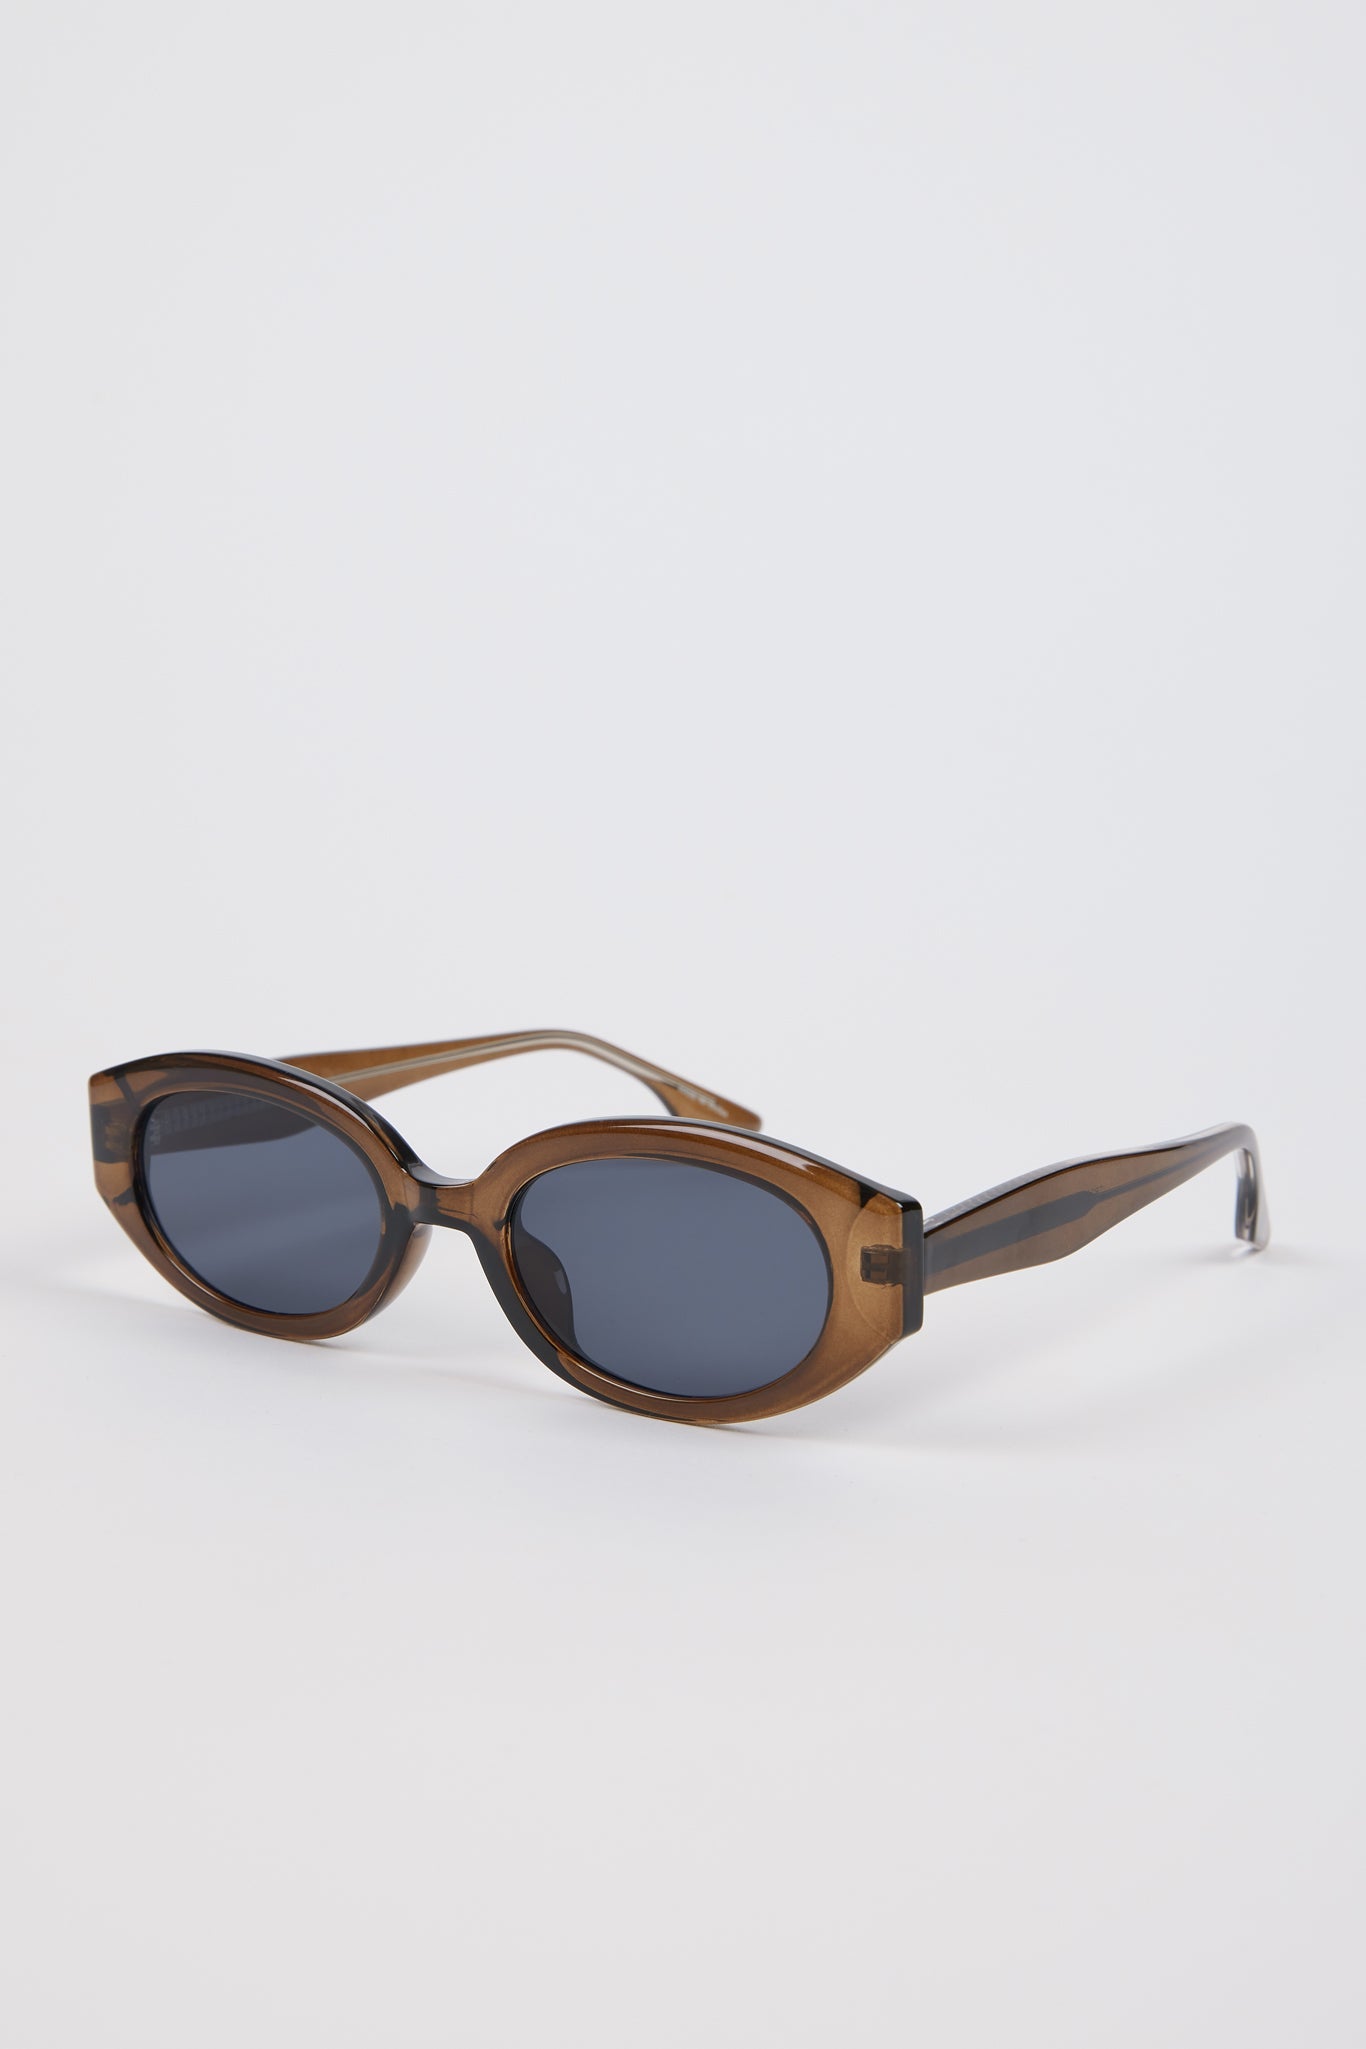 Brown rounded oval sunglasses